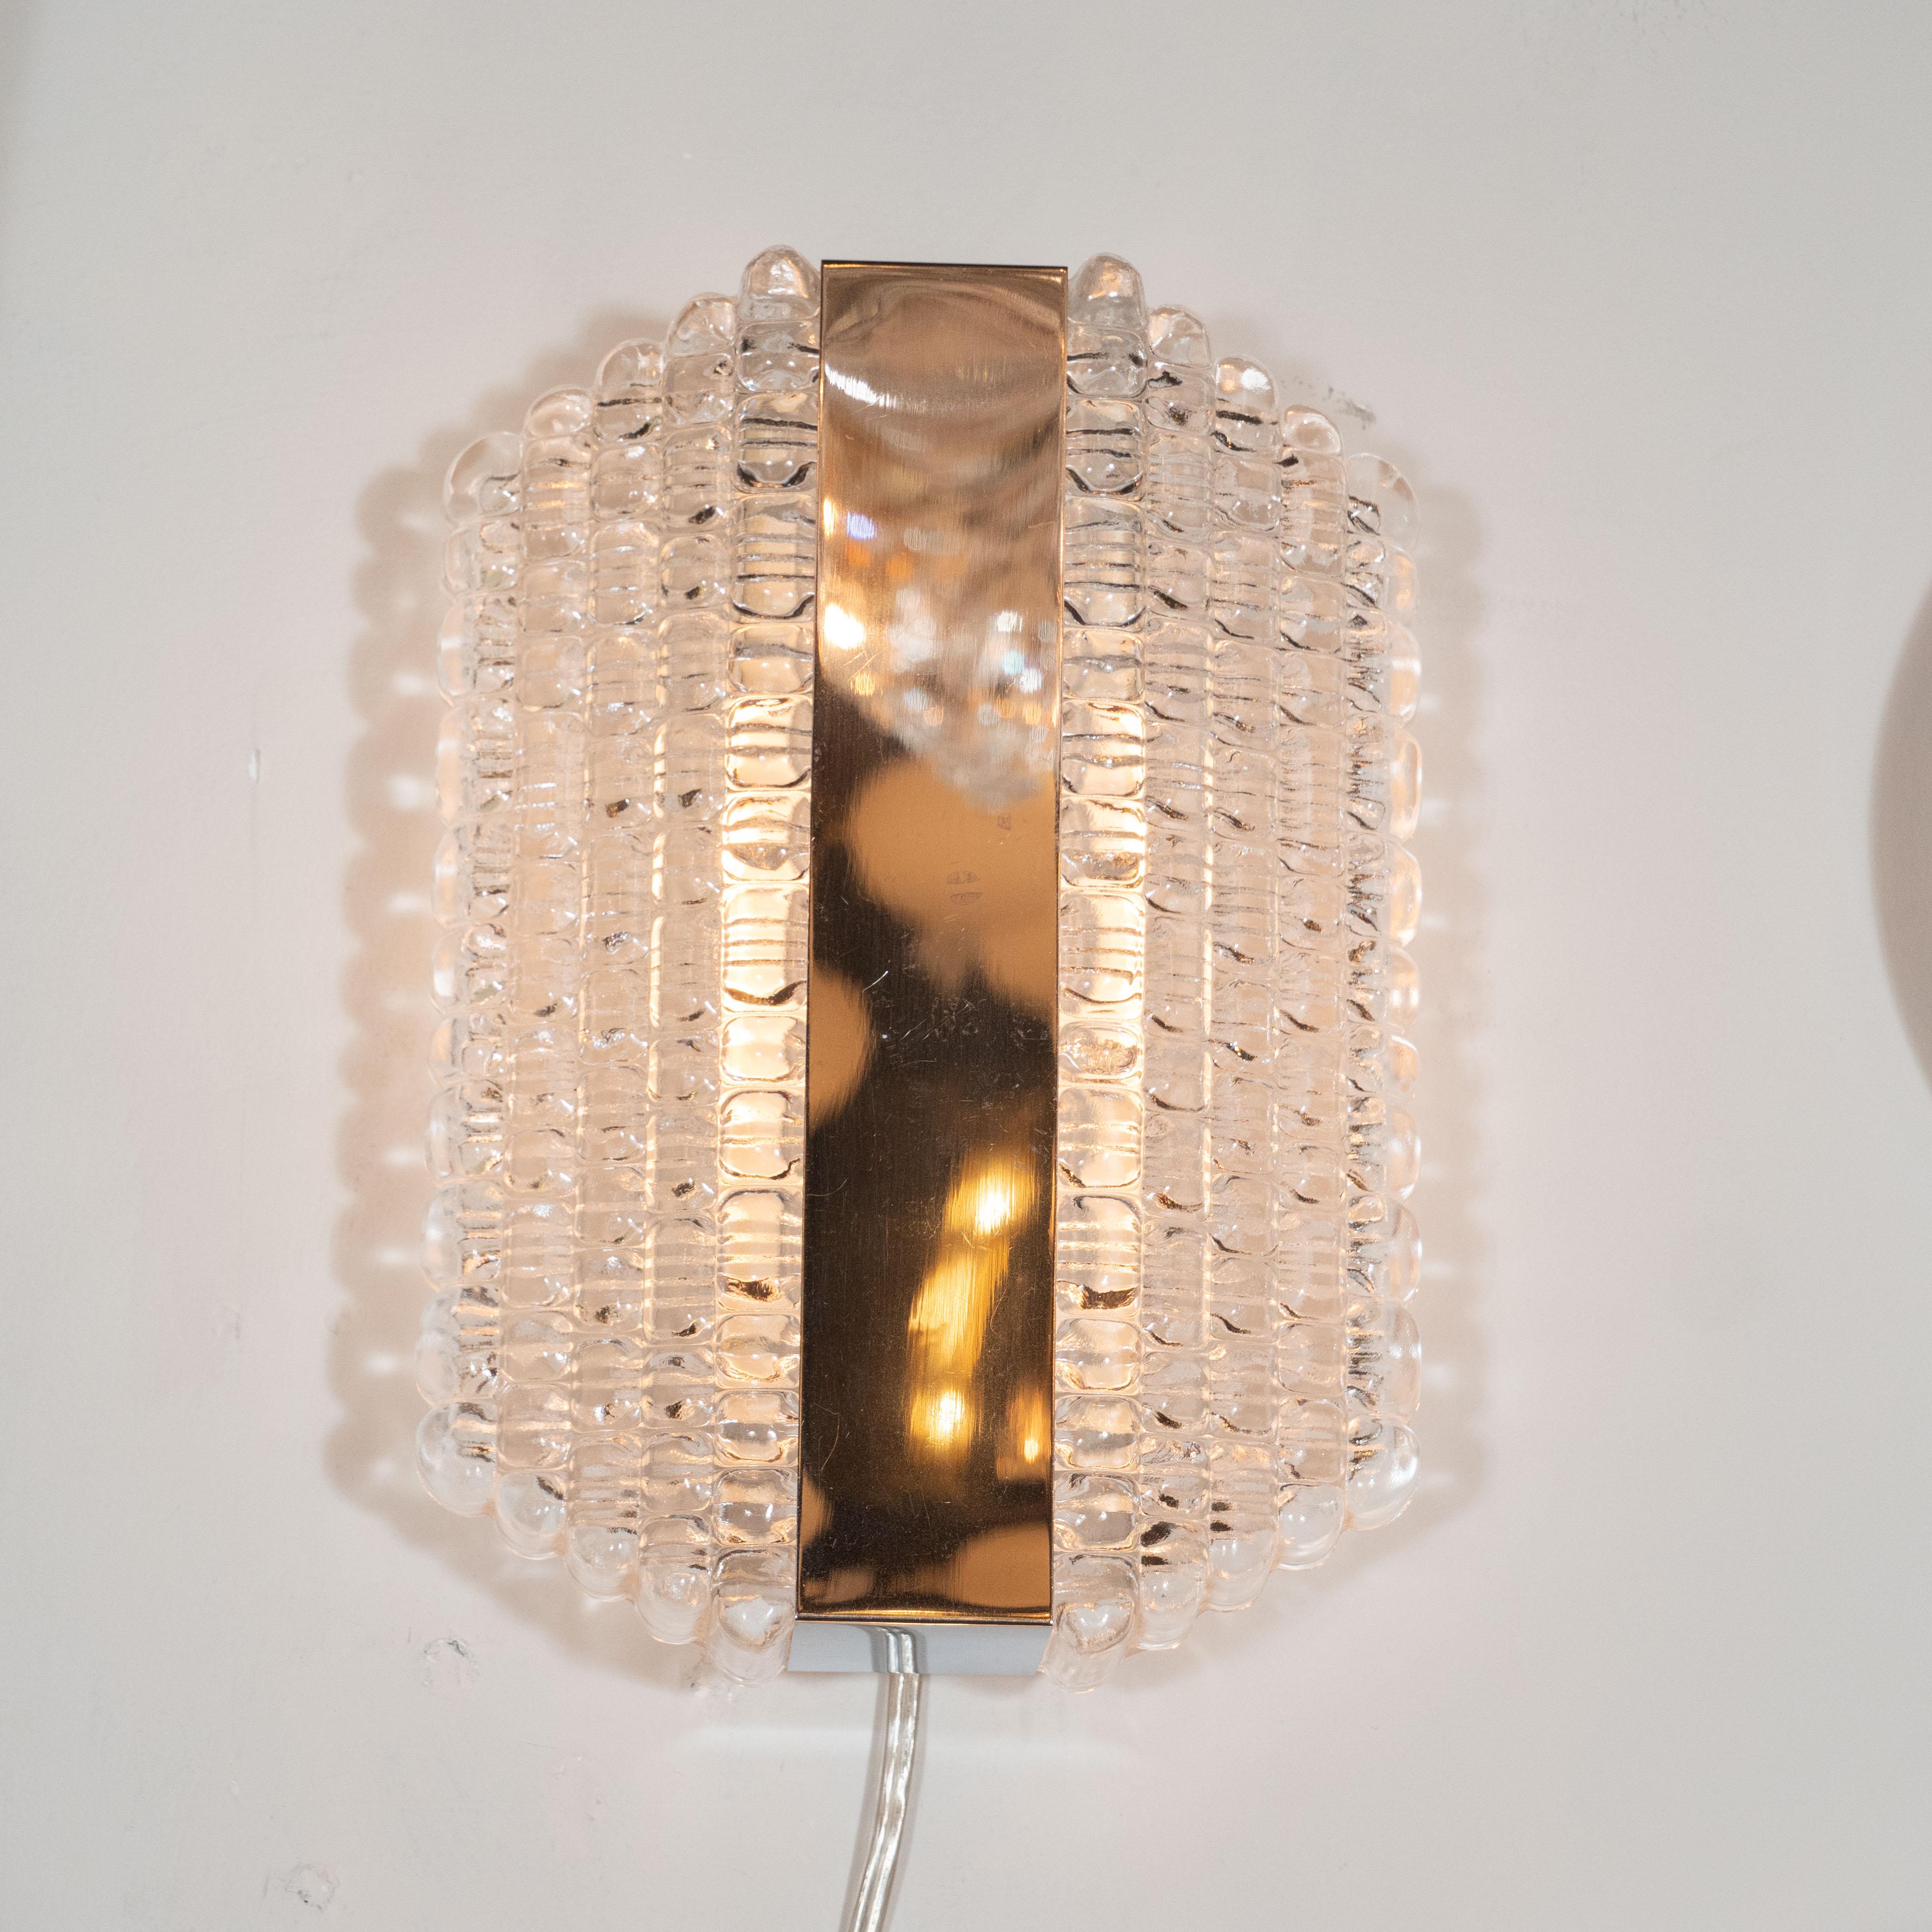 This refined pair of Mid-Century Modern sconces were realized by the esteemed glass studio Kaiser Leuchten in Germany, circa 1960. They feature five rows of touching textured glass on each side that diminish in height and depth to each edge,